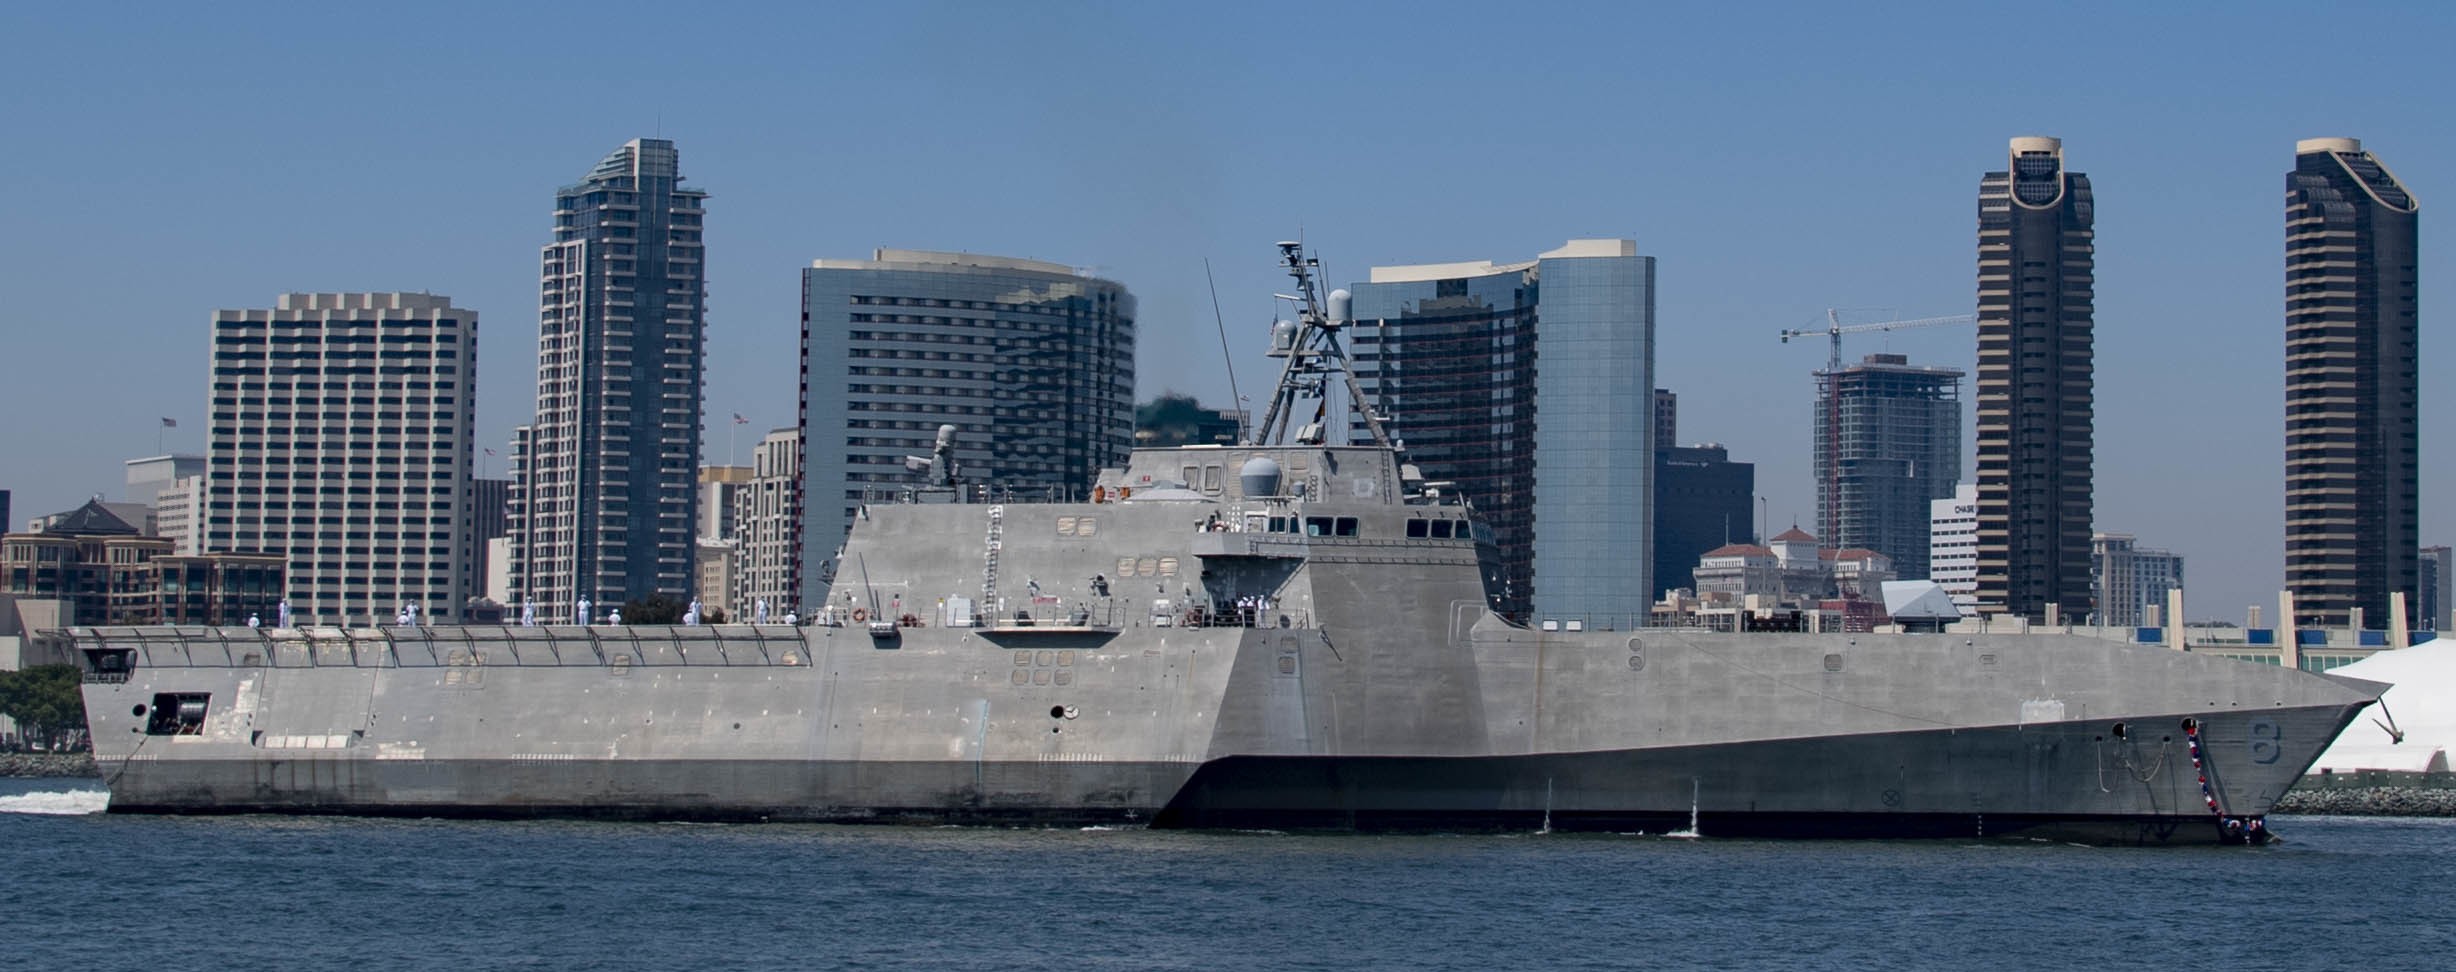 lcs-8 uss montgomery independence class littoral combat ship us navy 11